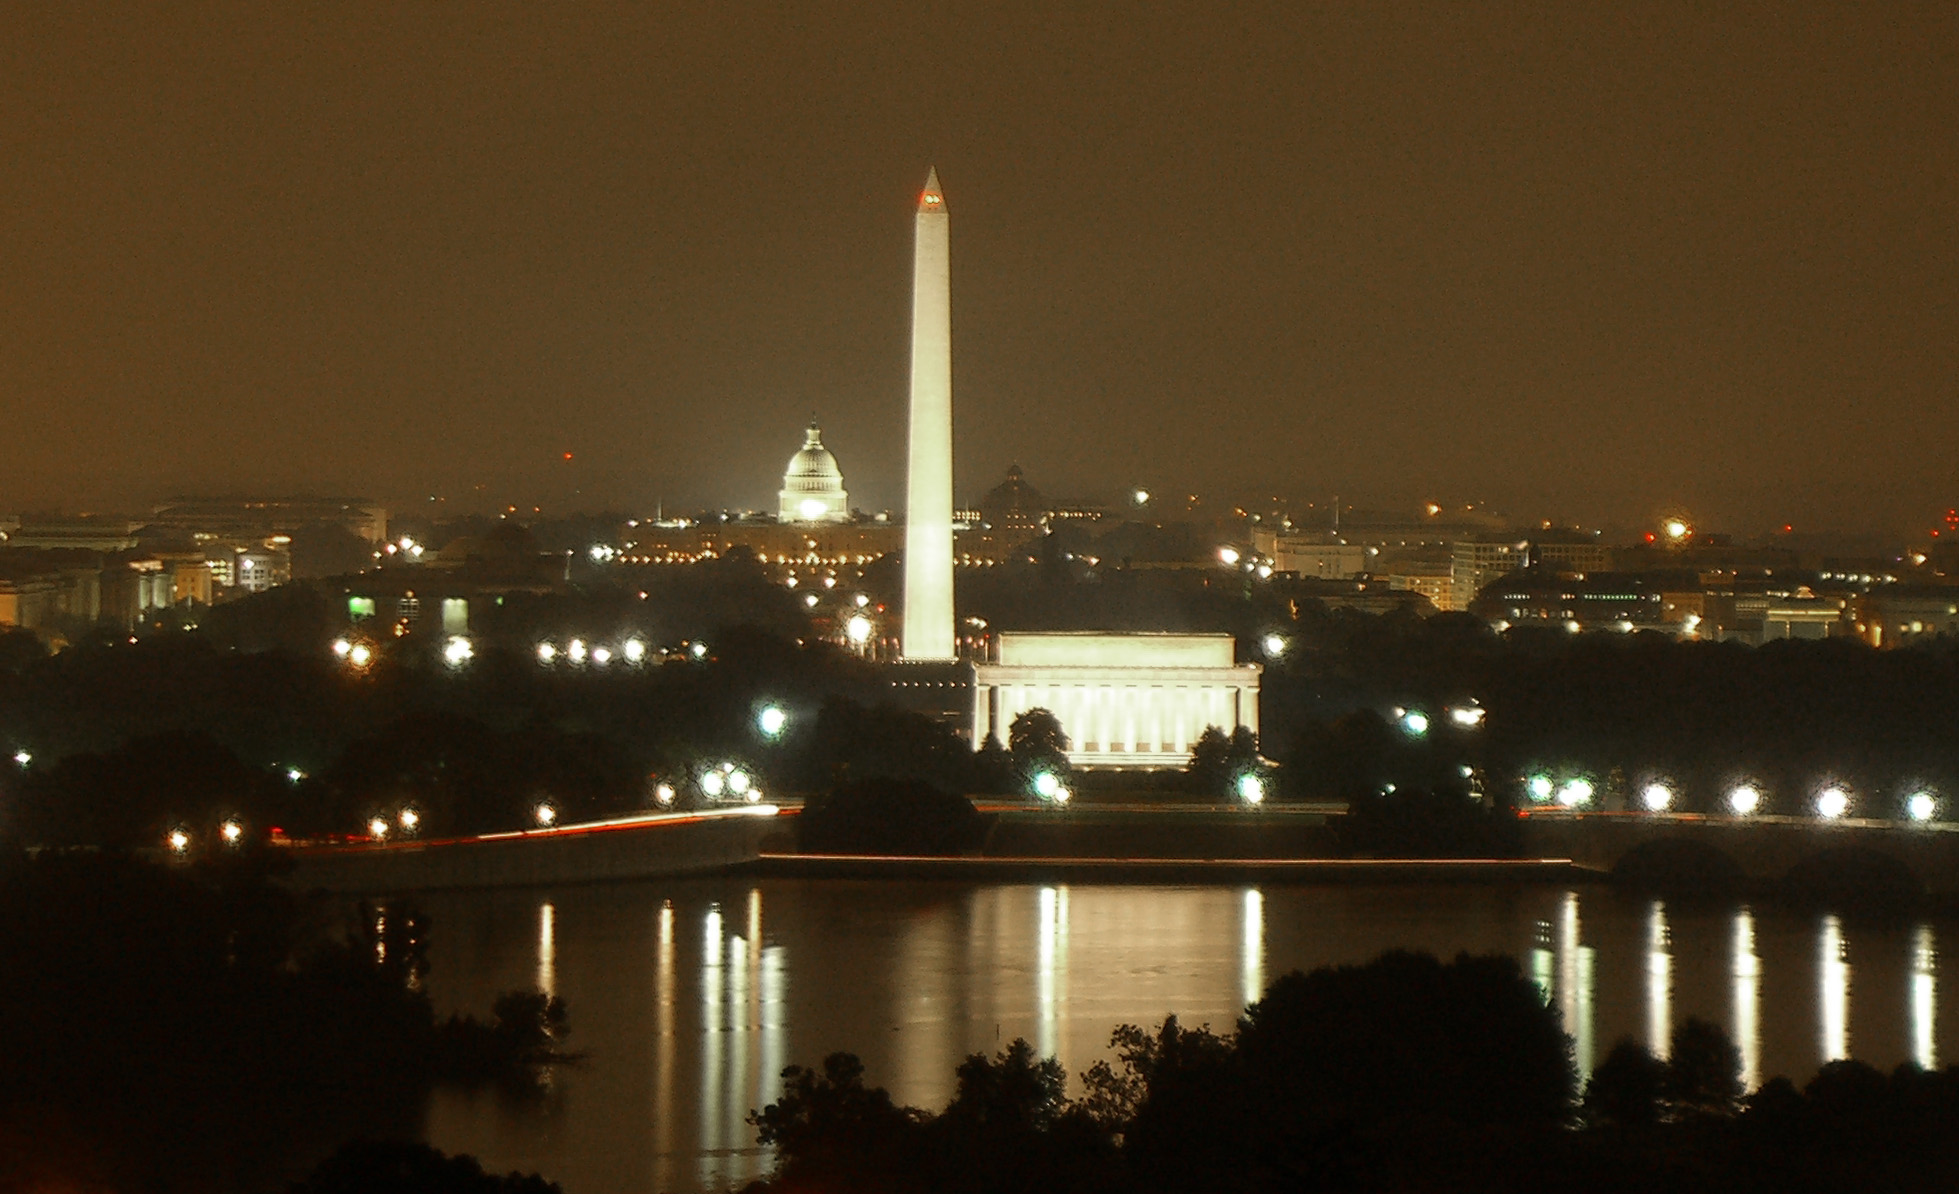 Washington, DC showing national mall, reflecting pool, and monument at night